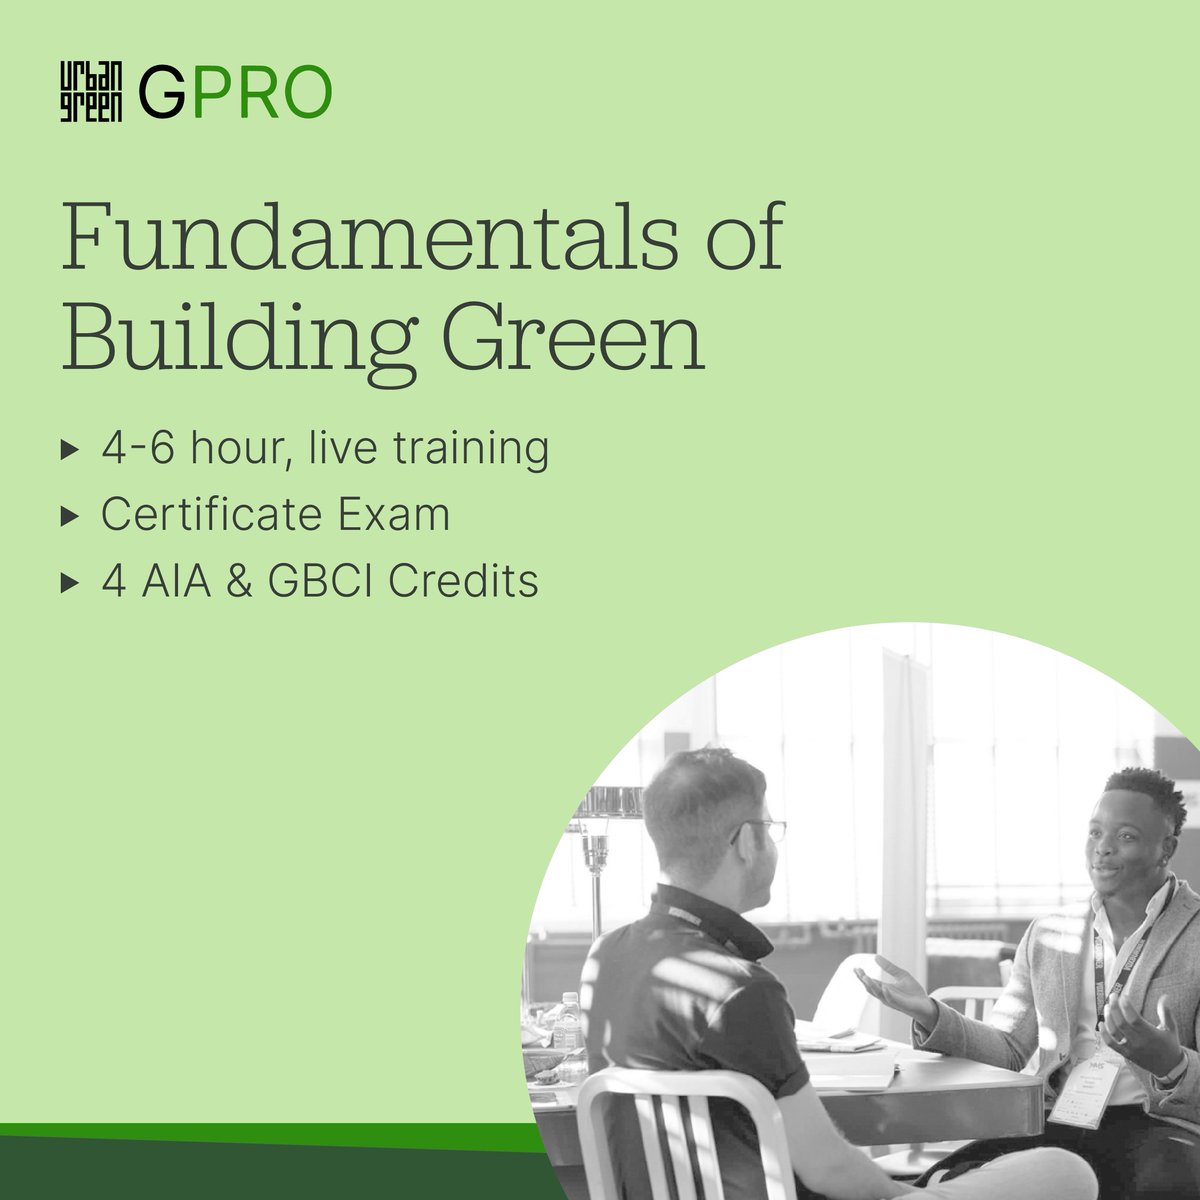 Alert: Training Opportunity! Join GPRO Fundamentals of Building Green next week to take your green building knowledge to the next level! Limited spots, register now: ow.ly/NUIP50QQHxy #CareerGrowth #GreenBuildings